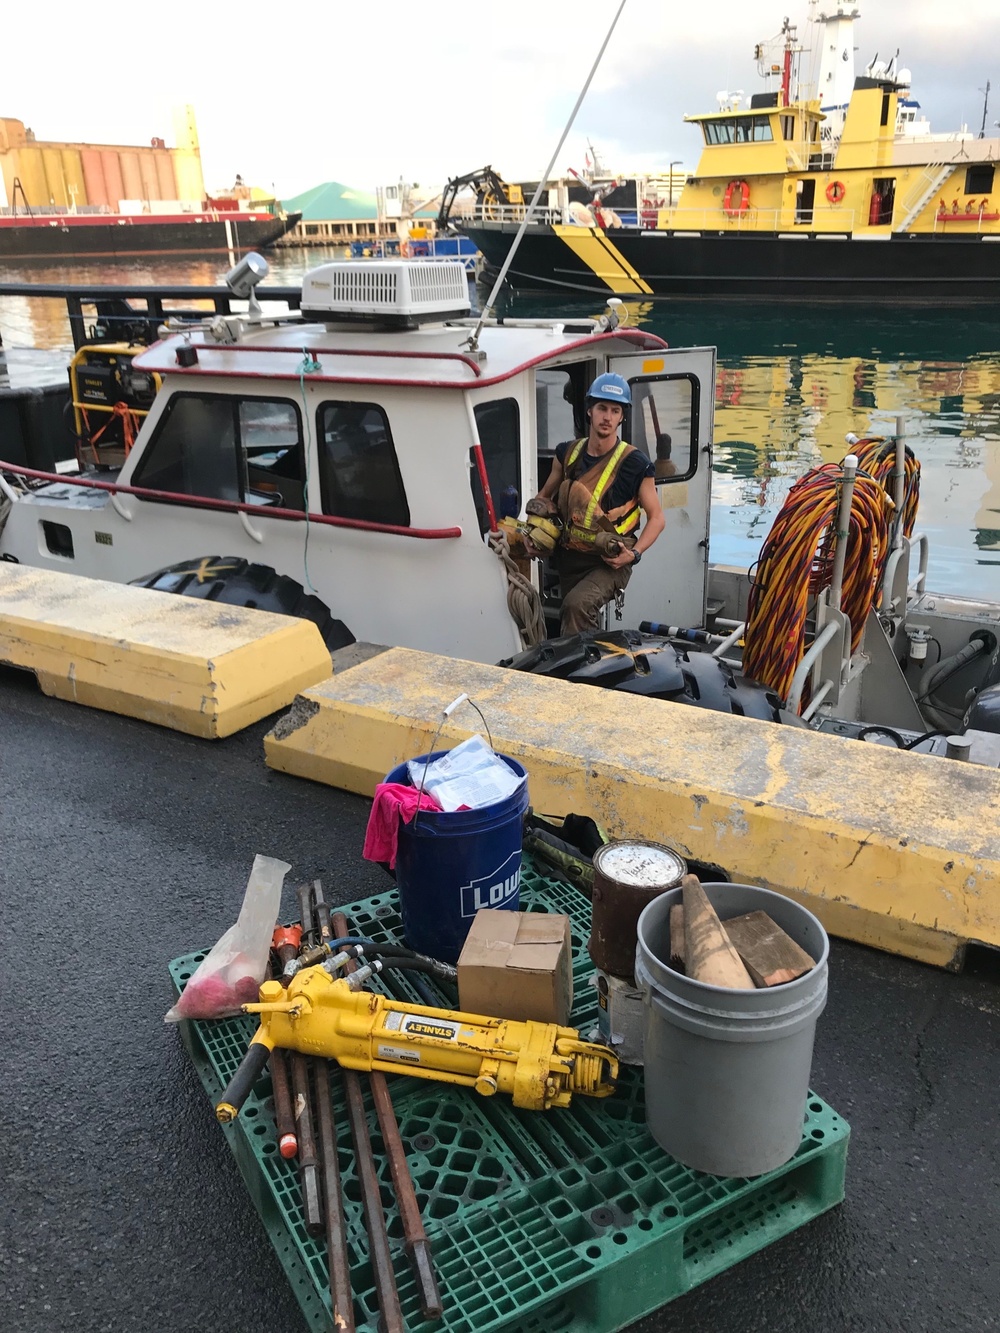 Responders prep gear for Pacific Paradise wreck removal efforts